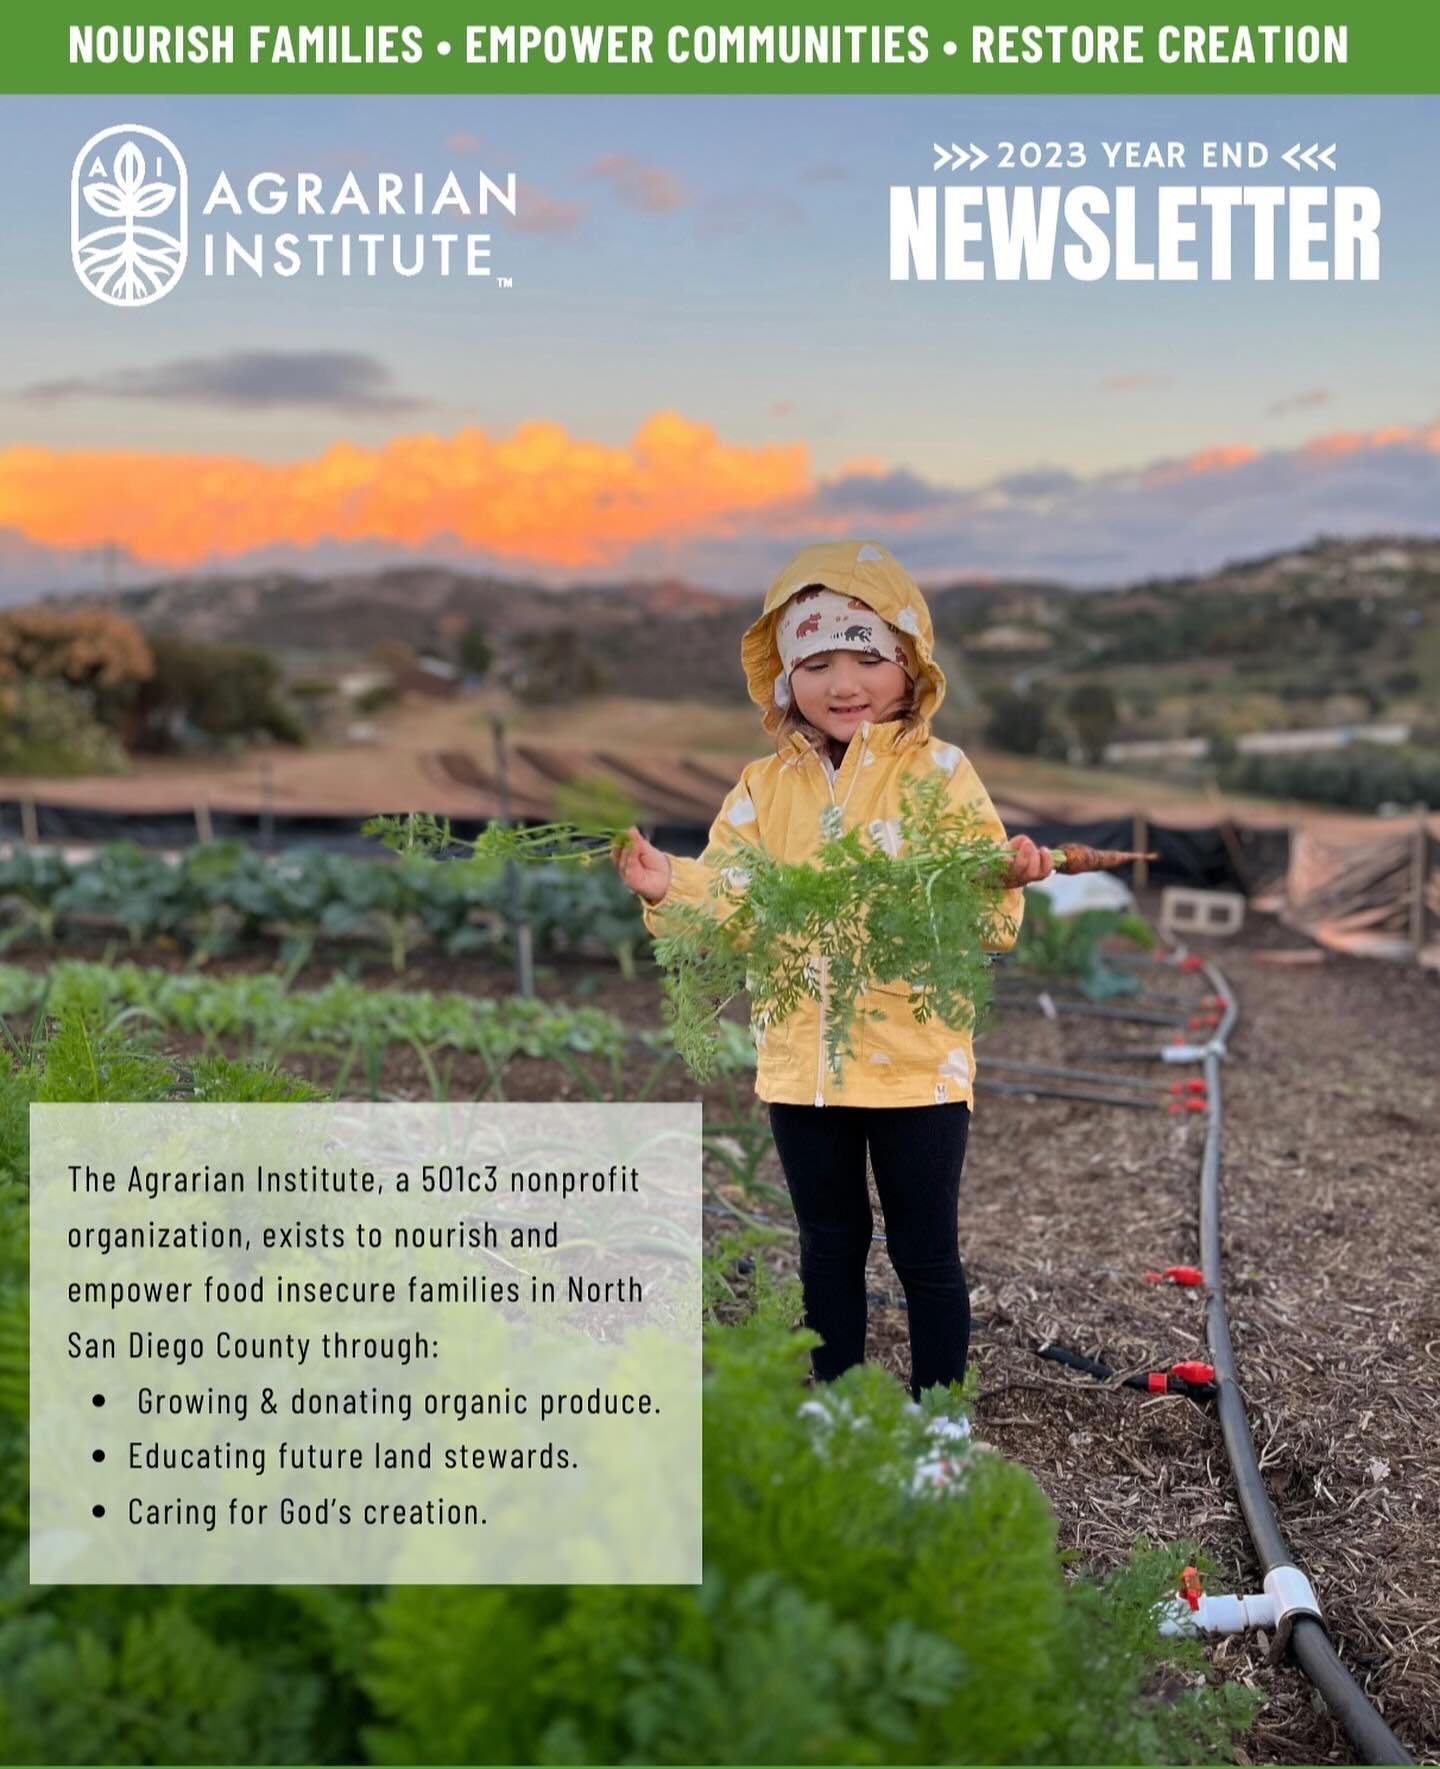 2023 has been full of memorable milestones for The Agrarian Institute! 😍🙏🏽🌱 Check out our End Year Newsletter and learn more about our work. Link in bio.